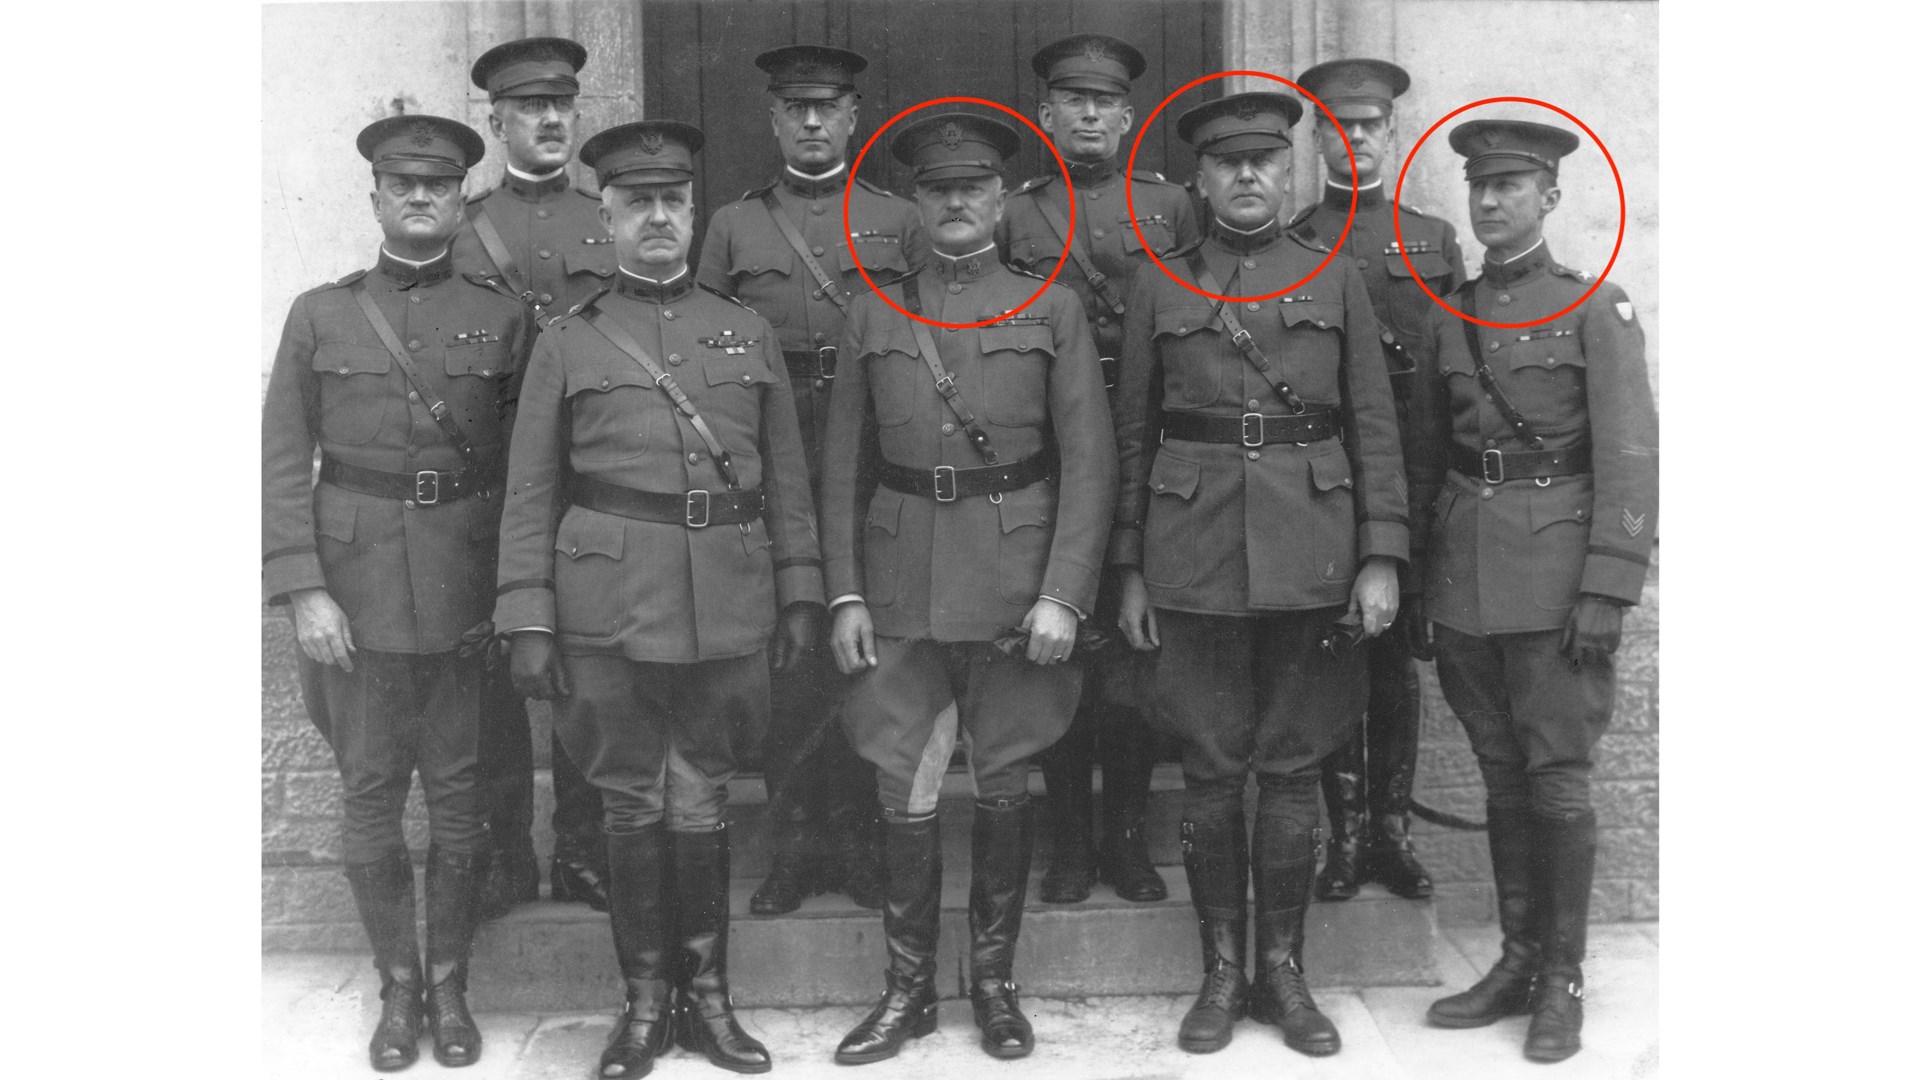 The three circled men had significant influence in fielding riot guns with bayonet adapters in combat. Commander of the AEF General Pershing (left) requested the initial adoption of a bayonet capable shotgun. Assistant Chief of Staff for Operations, Brigadier General Fox Conner (center), helped establish the combat trials and supported the adoption of shotguns for trench warfare. Assistant Chief of Staff for Logistics, Brigadier General George Van Horn Moseley (right) worked to get the shotguns in the hands of the Doughboys of combat divisions.